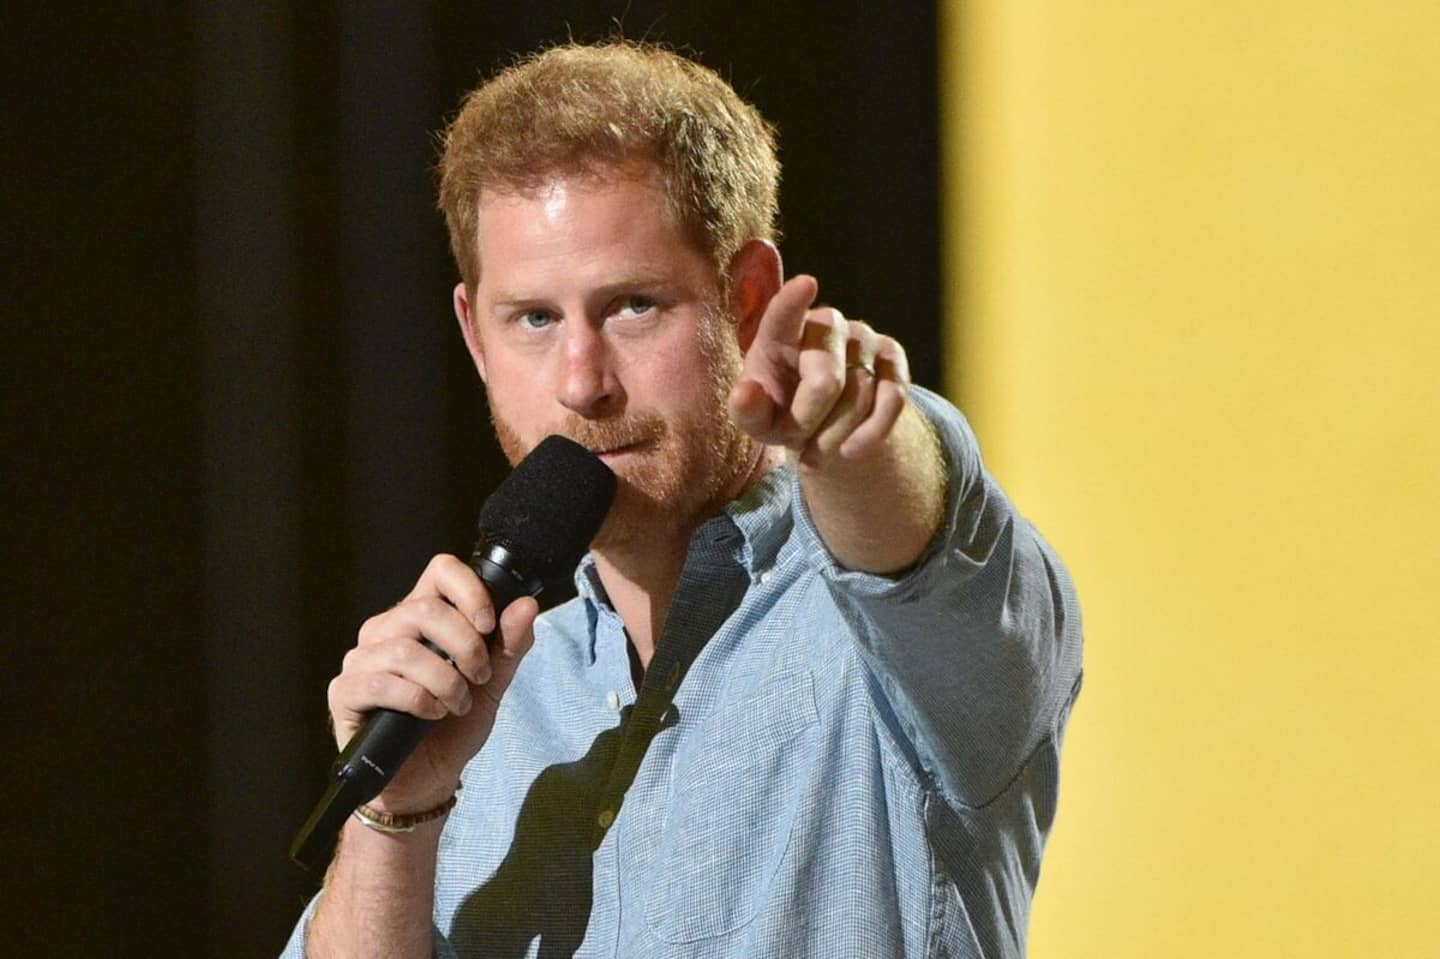 Prince Harry on television to defend his sensational memoirs on the royal family